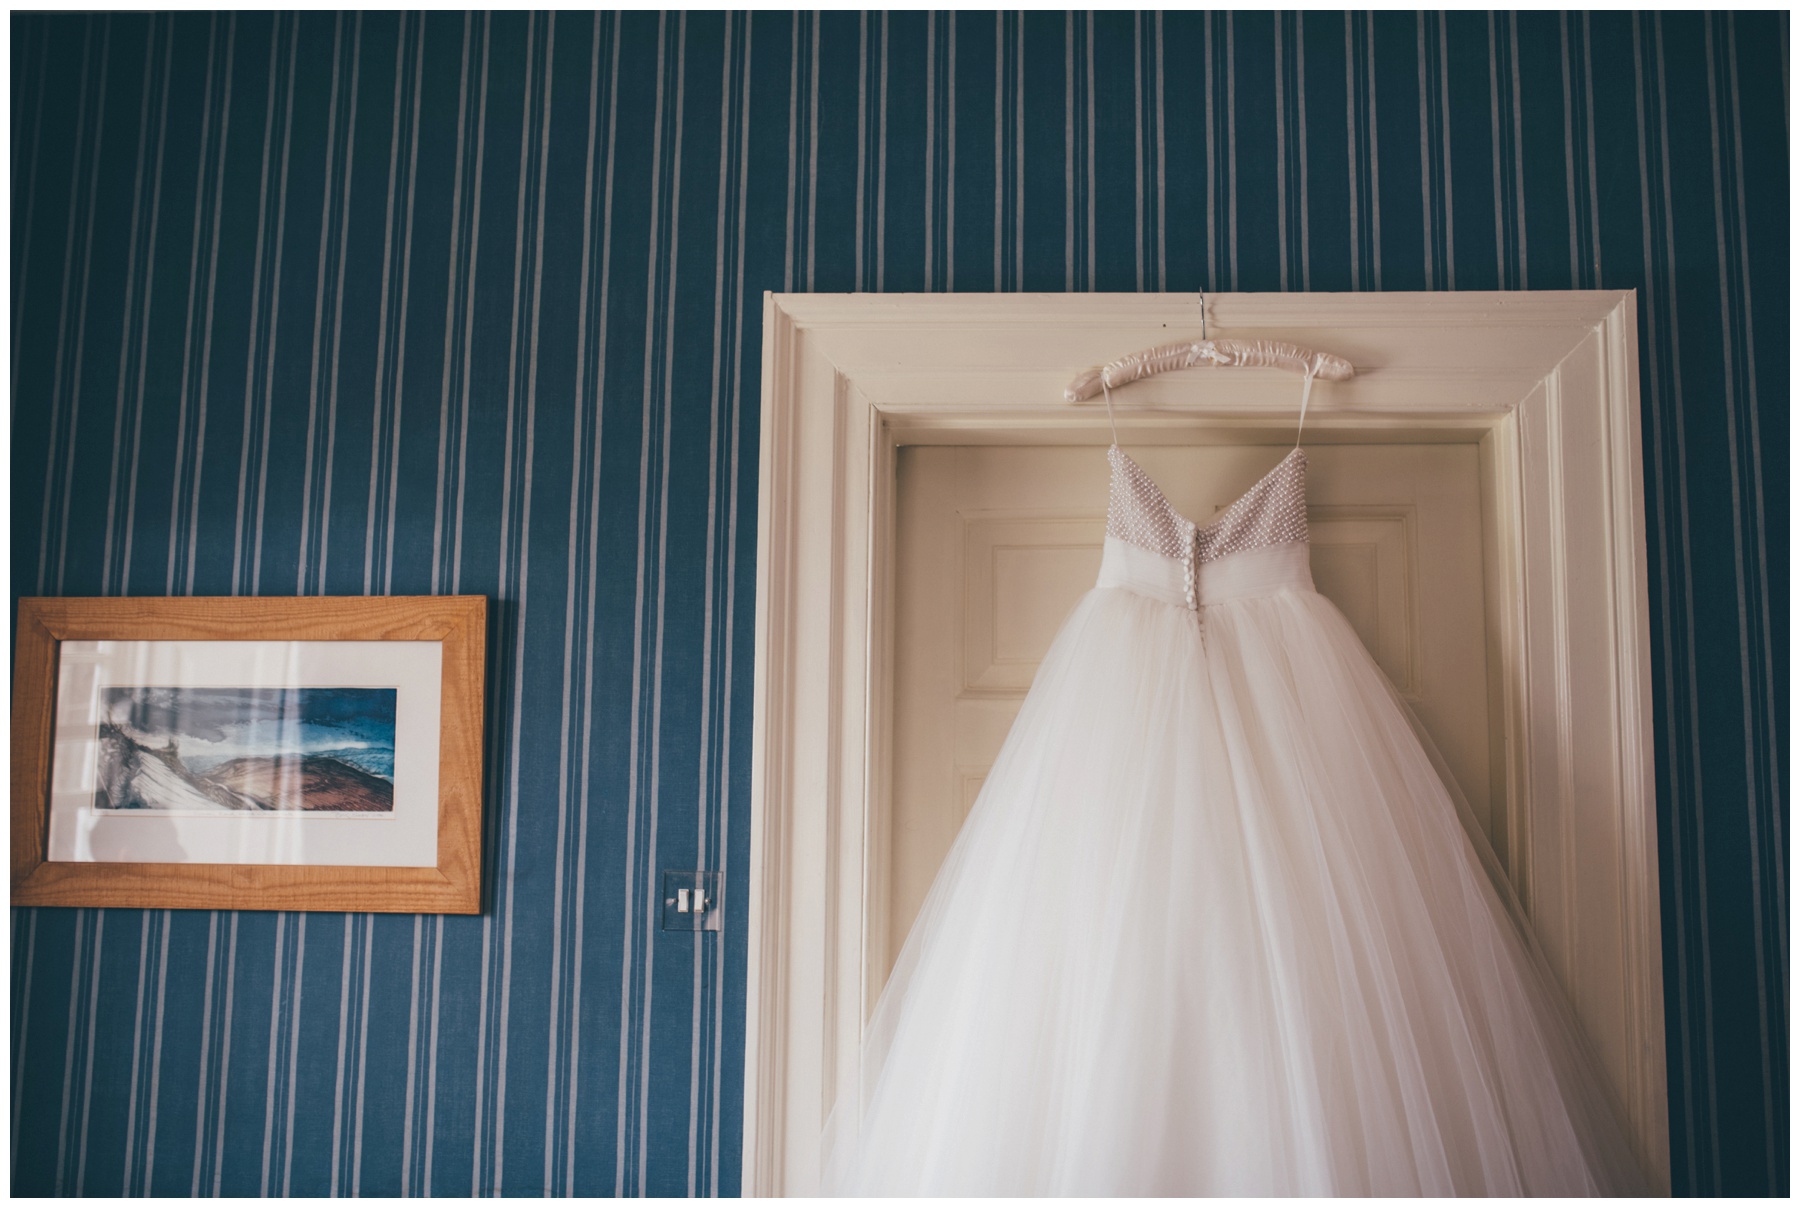 Stunning Ronald Joyce beaded gown, hung up in the bridal suite at Swinton Park Estate in Yorkshire.